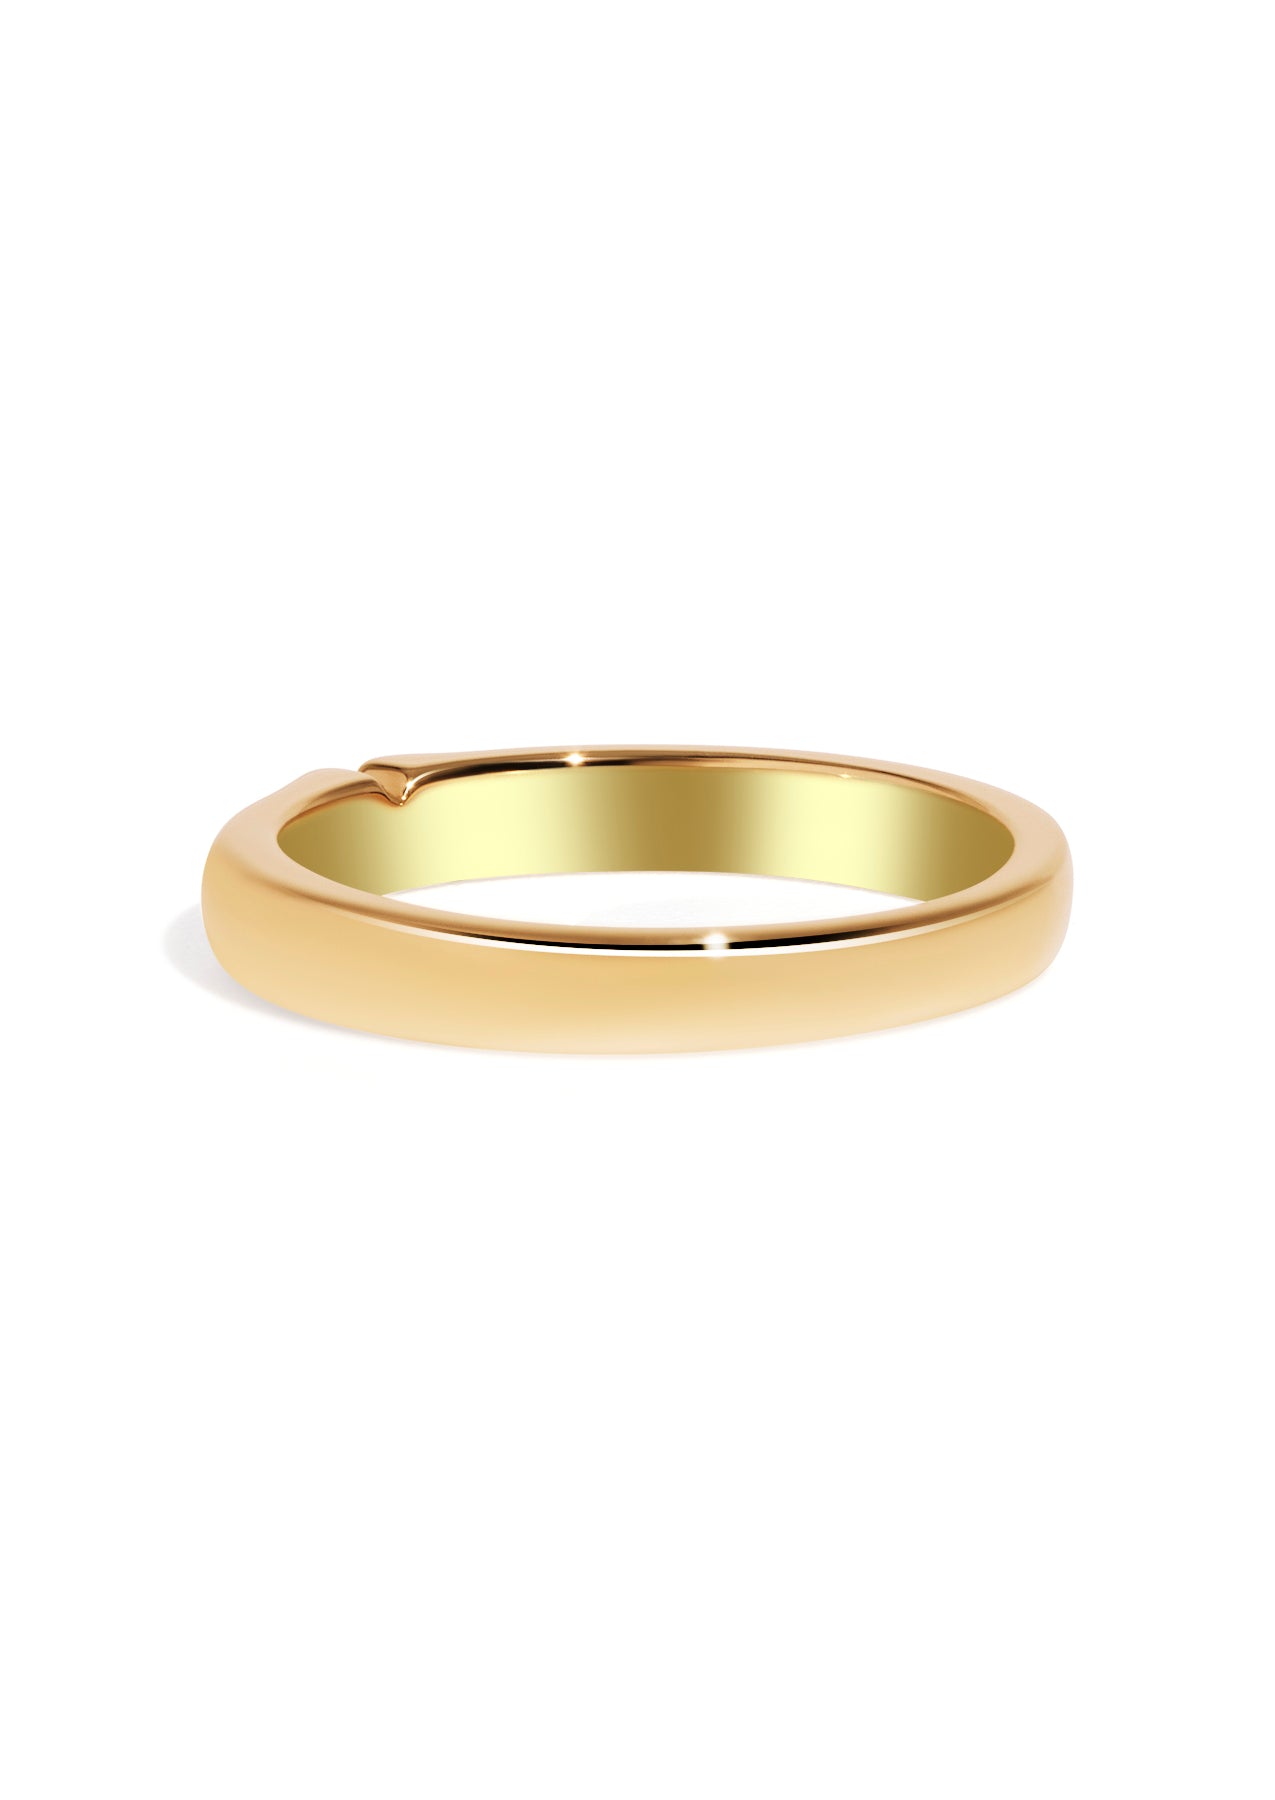 The Insignia 9ct Solid Gold Ring